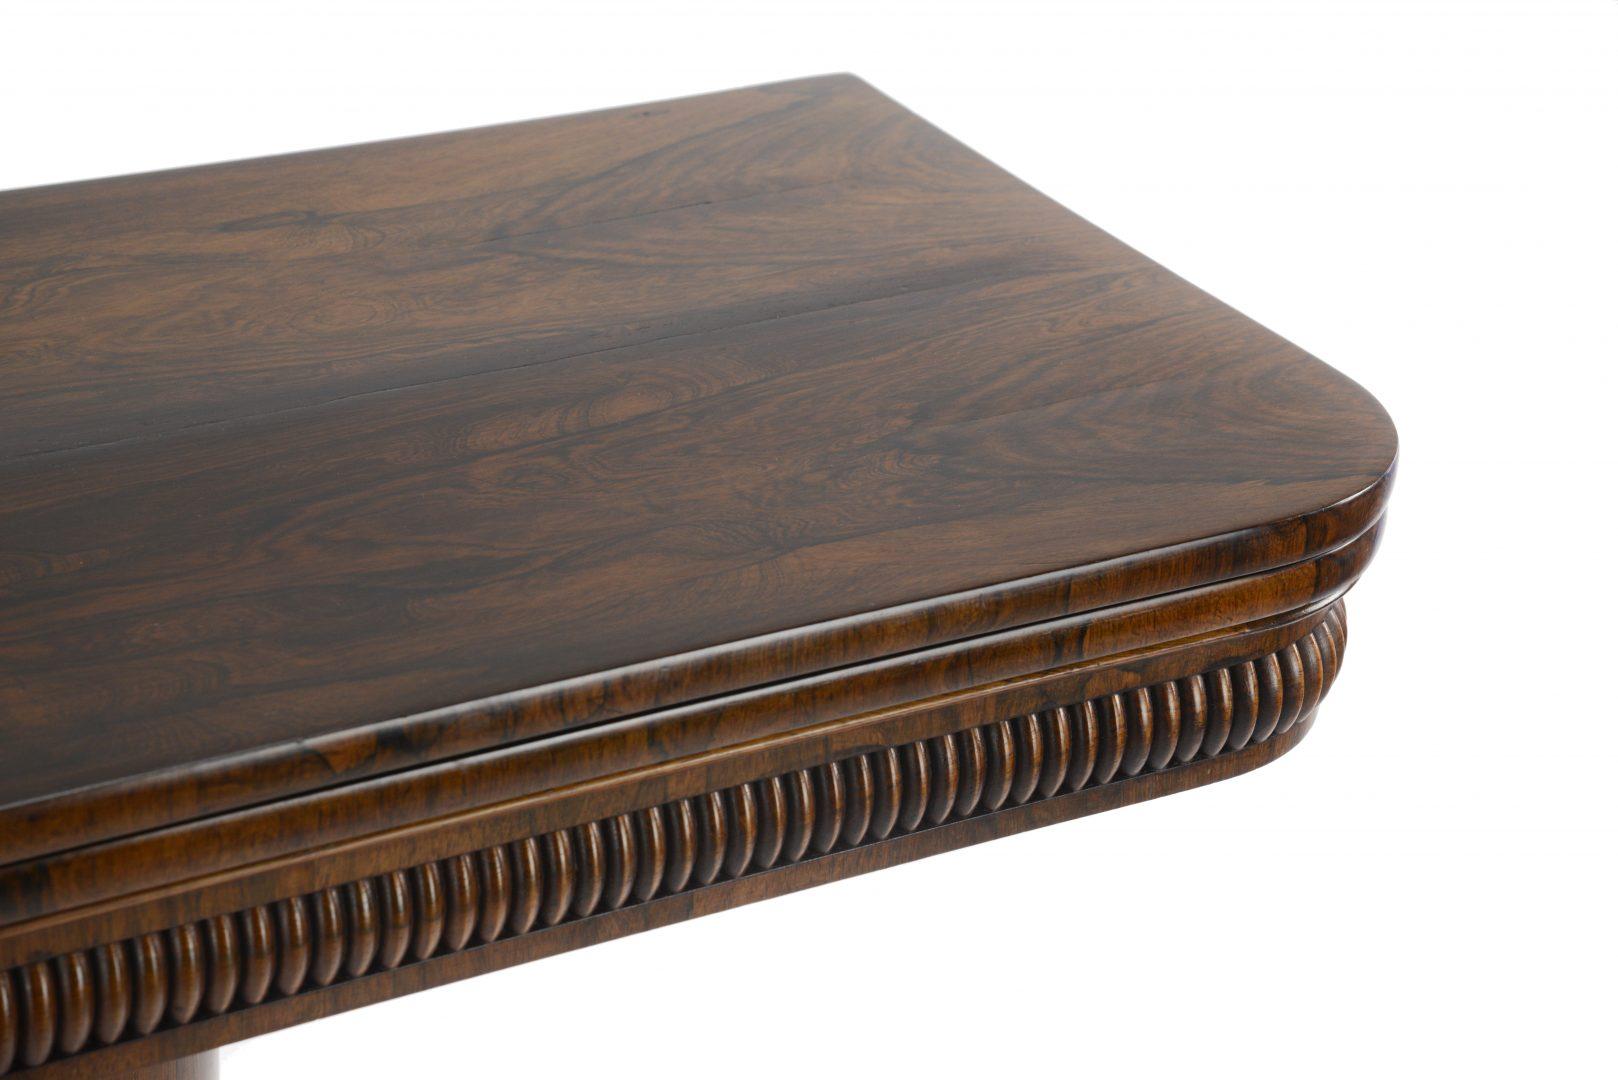 Early 19th Century Fine William IV Rosewood Card Table, Attributed to Gillows